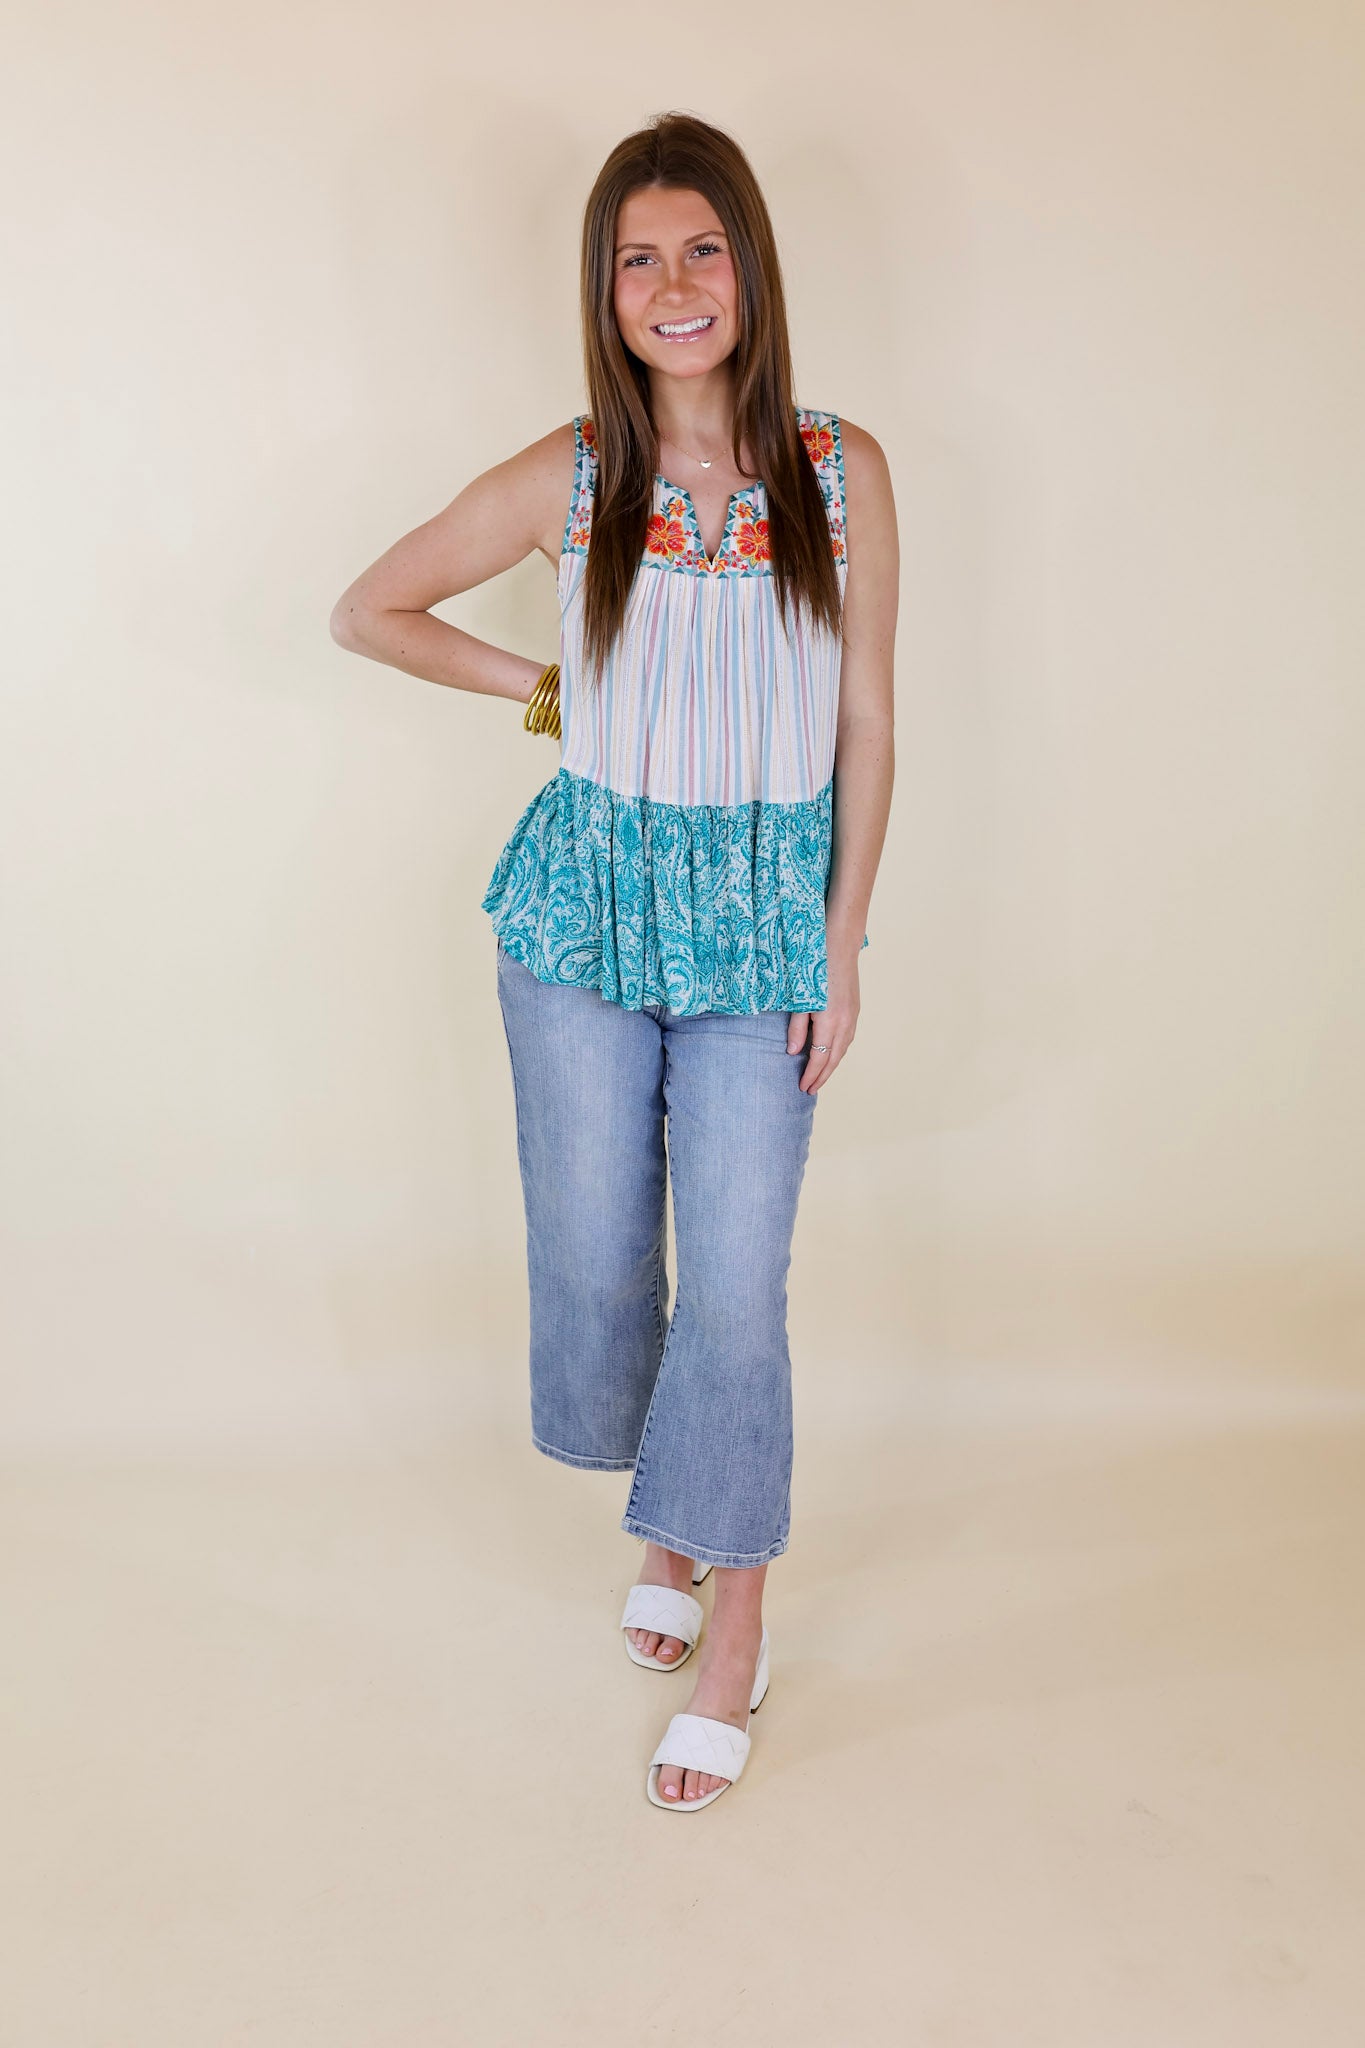 Coastal Caravan Print Block Tank Top with Floral Embroidery in Turquoise Mix - Giddy Up Glamour Boutique